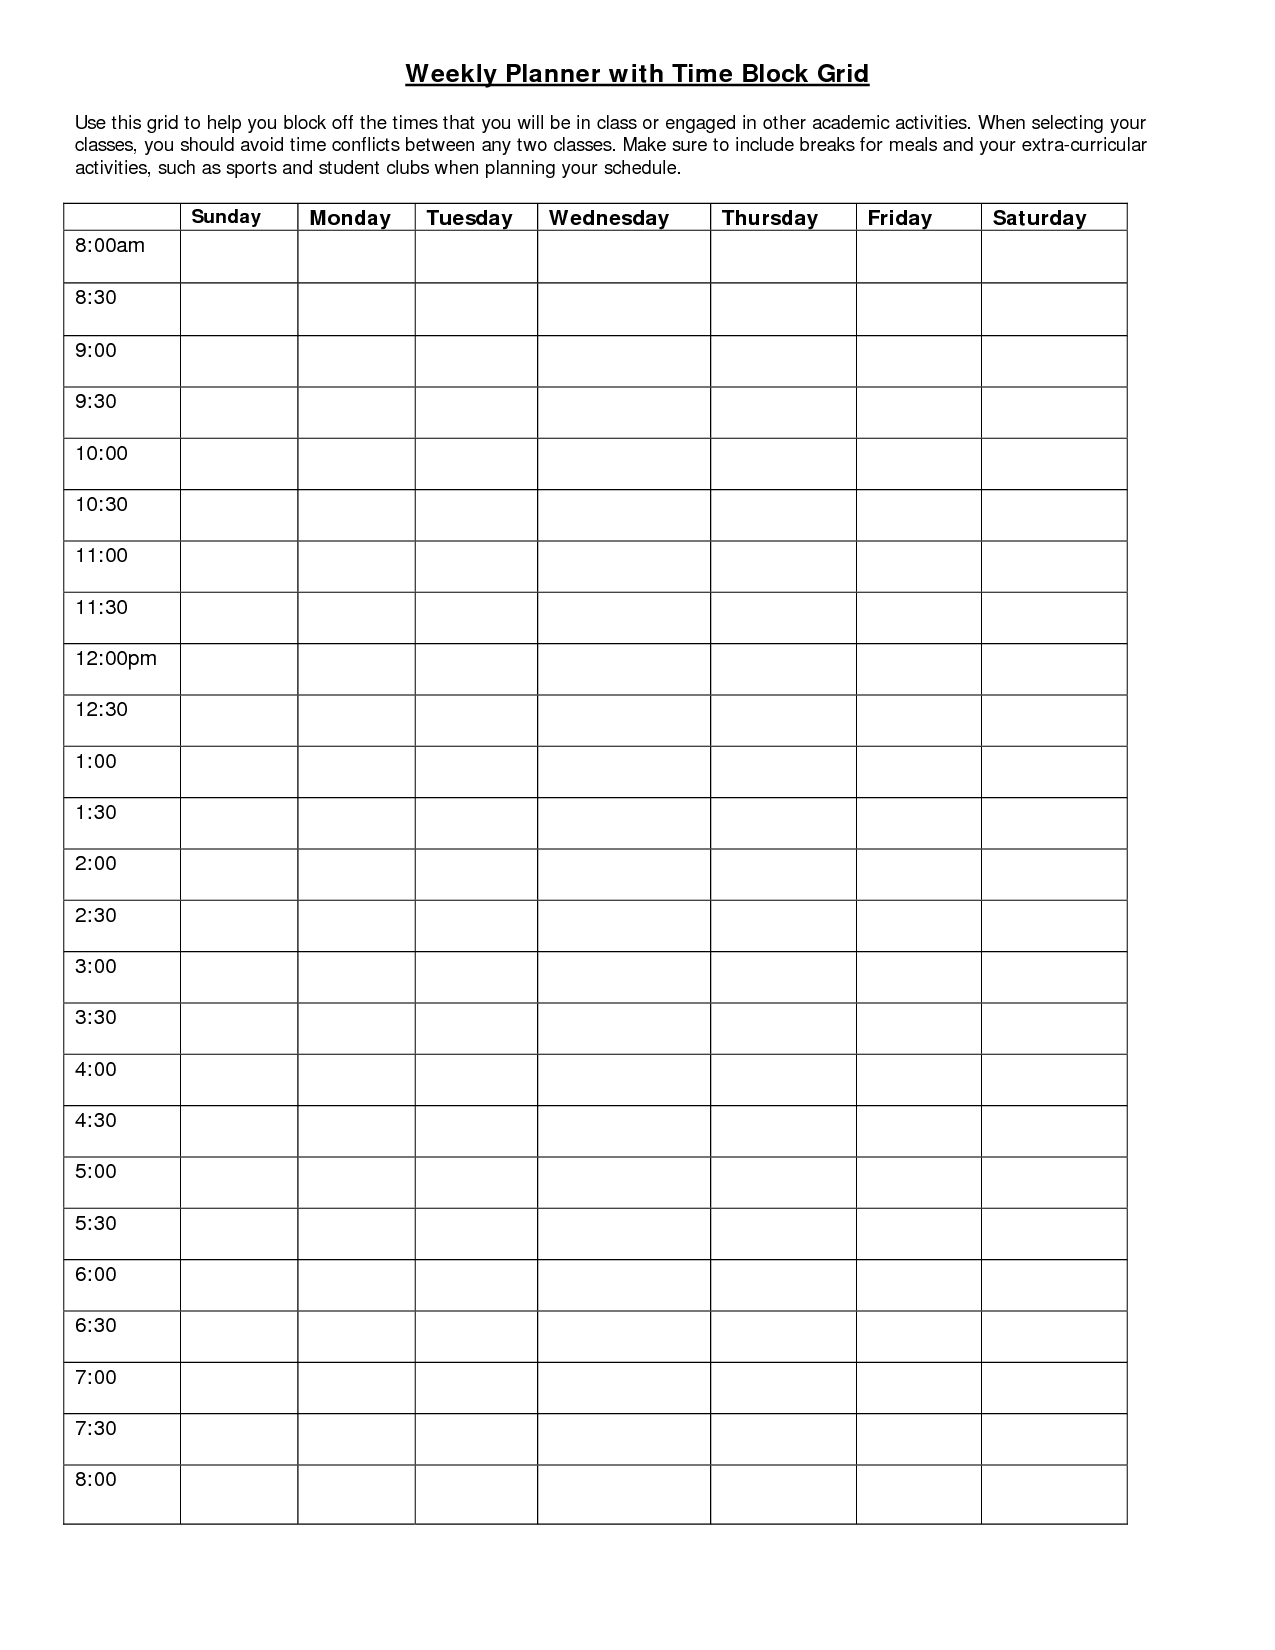 Weekly Planner With Time Block Grid | Weekly Planner throughout 24 Hour Planner Printable